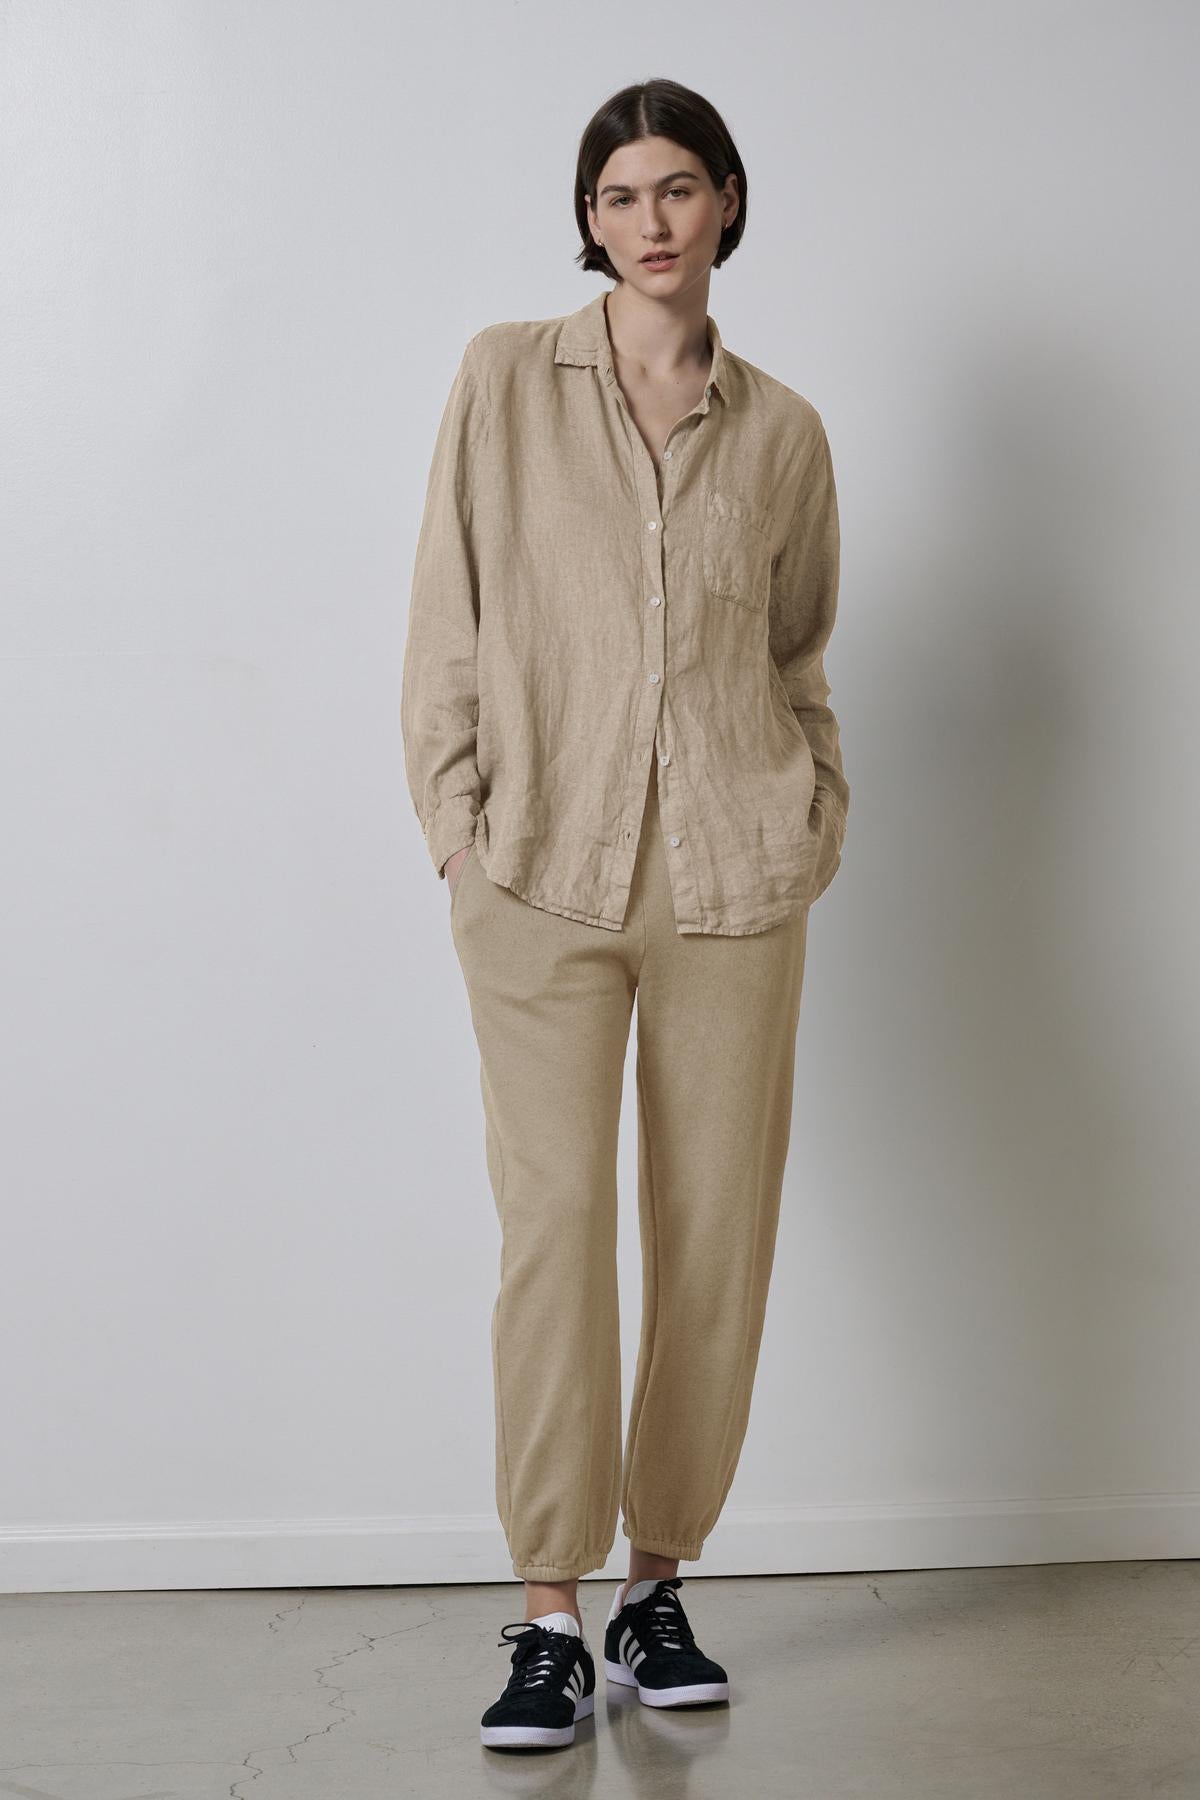 Woman dressed in a casual beige linen shirt and ZUMA SWEATPANT by Velvet by Jenny Graham with black sneakers standing against a plain background.-36463615574209